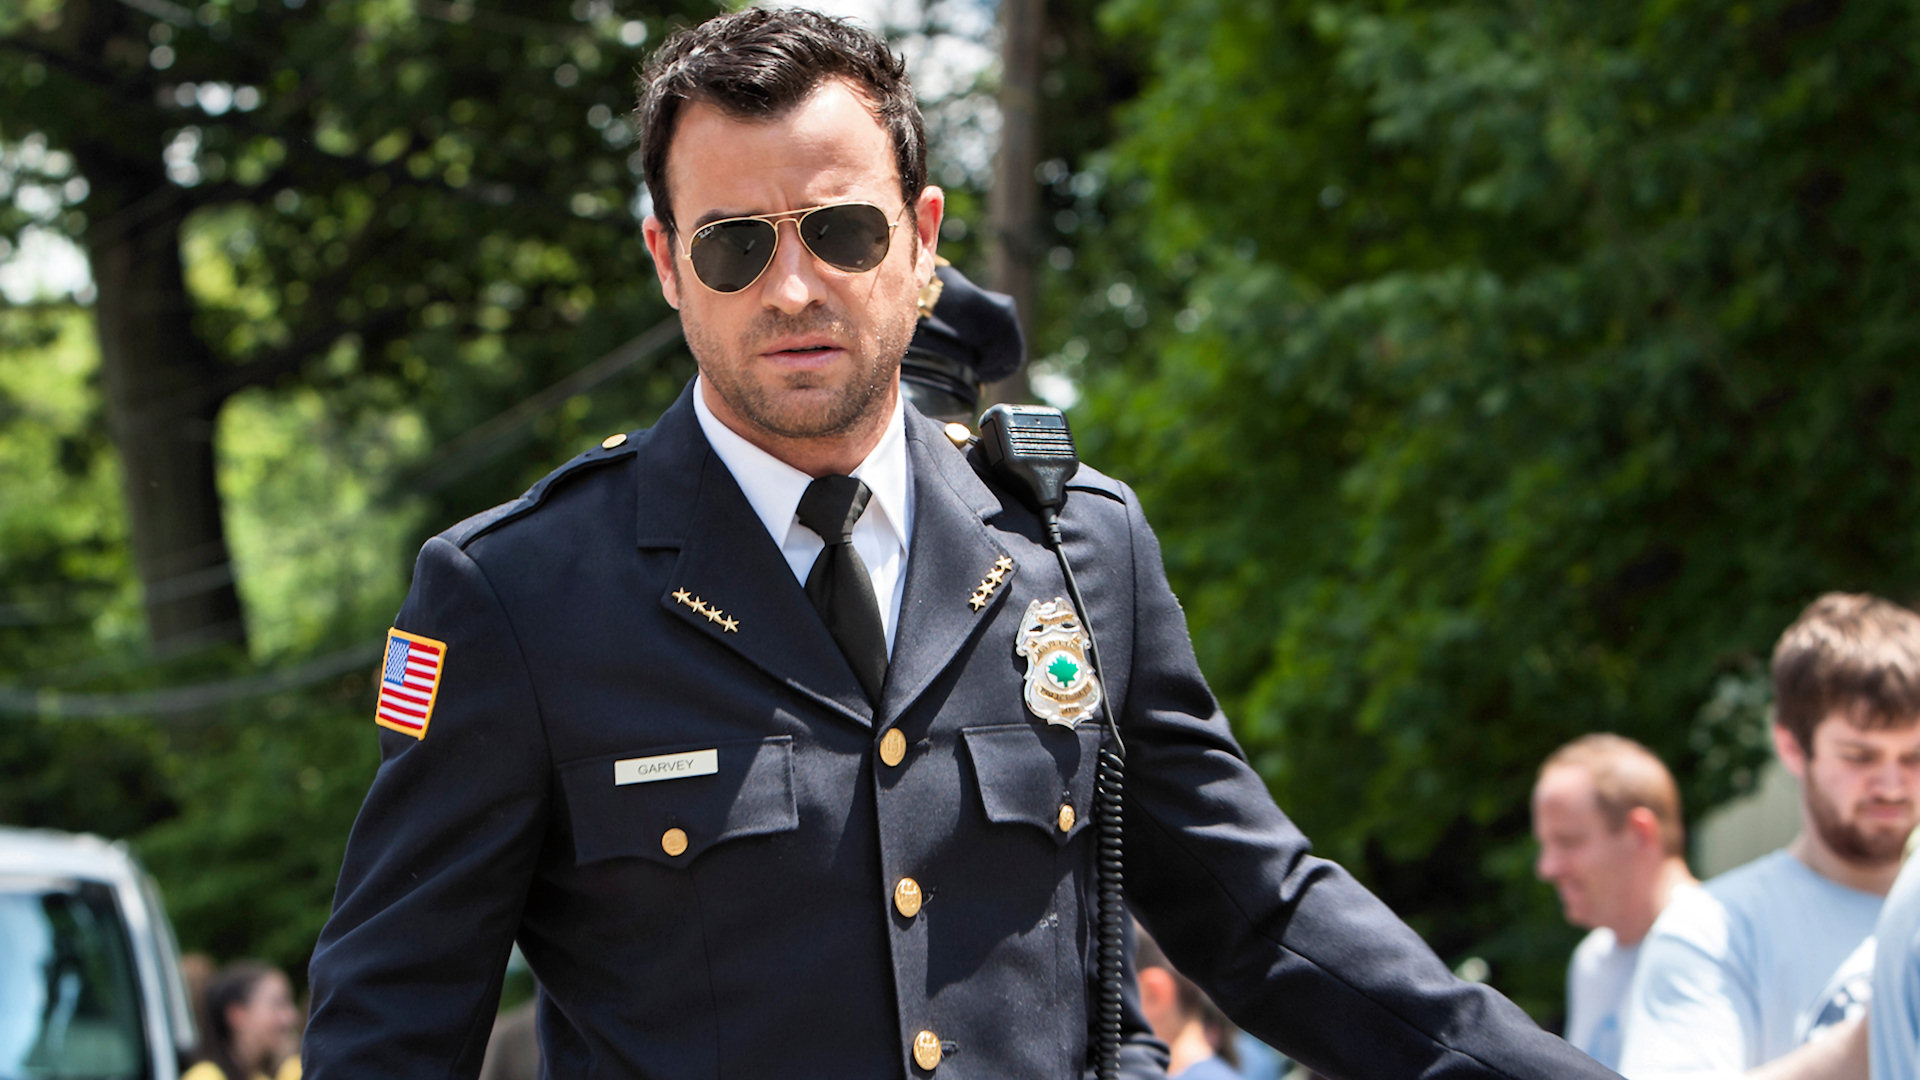 The Leftovers Full HD Wallpaper And Background